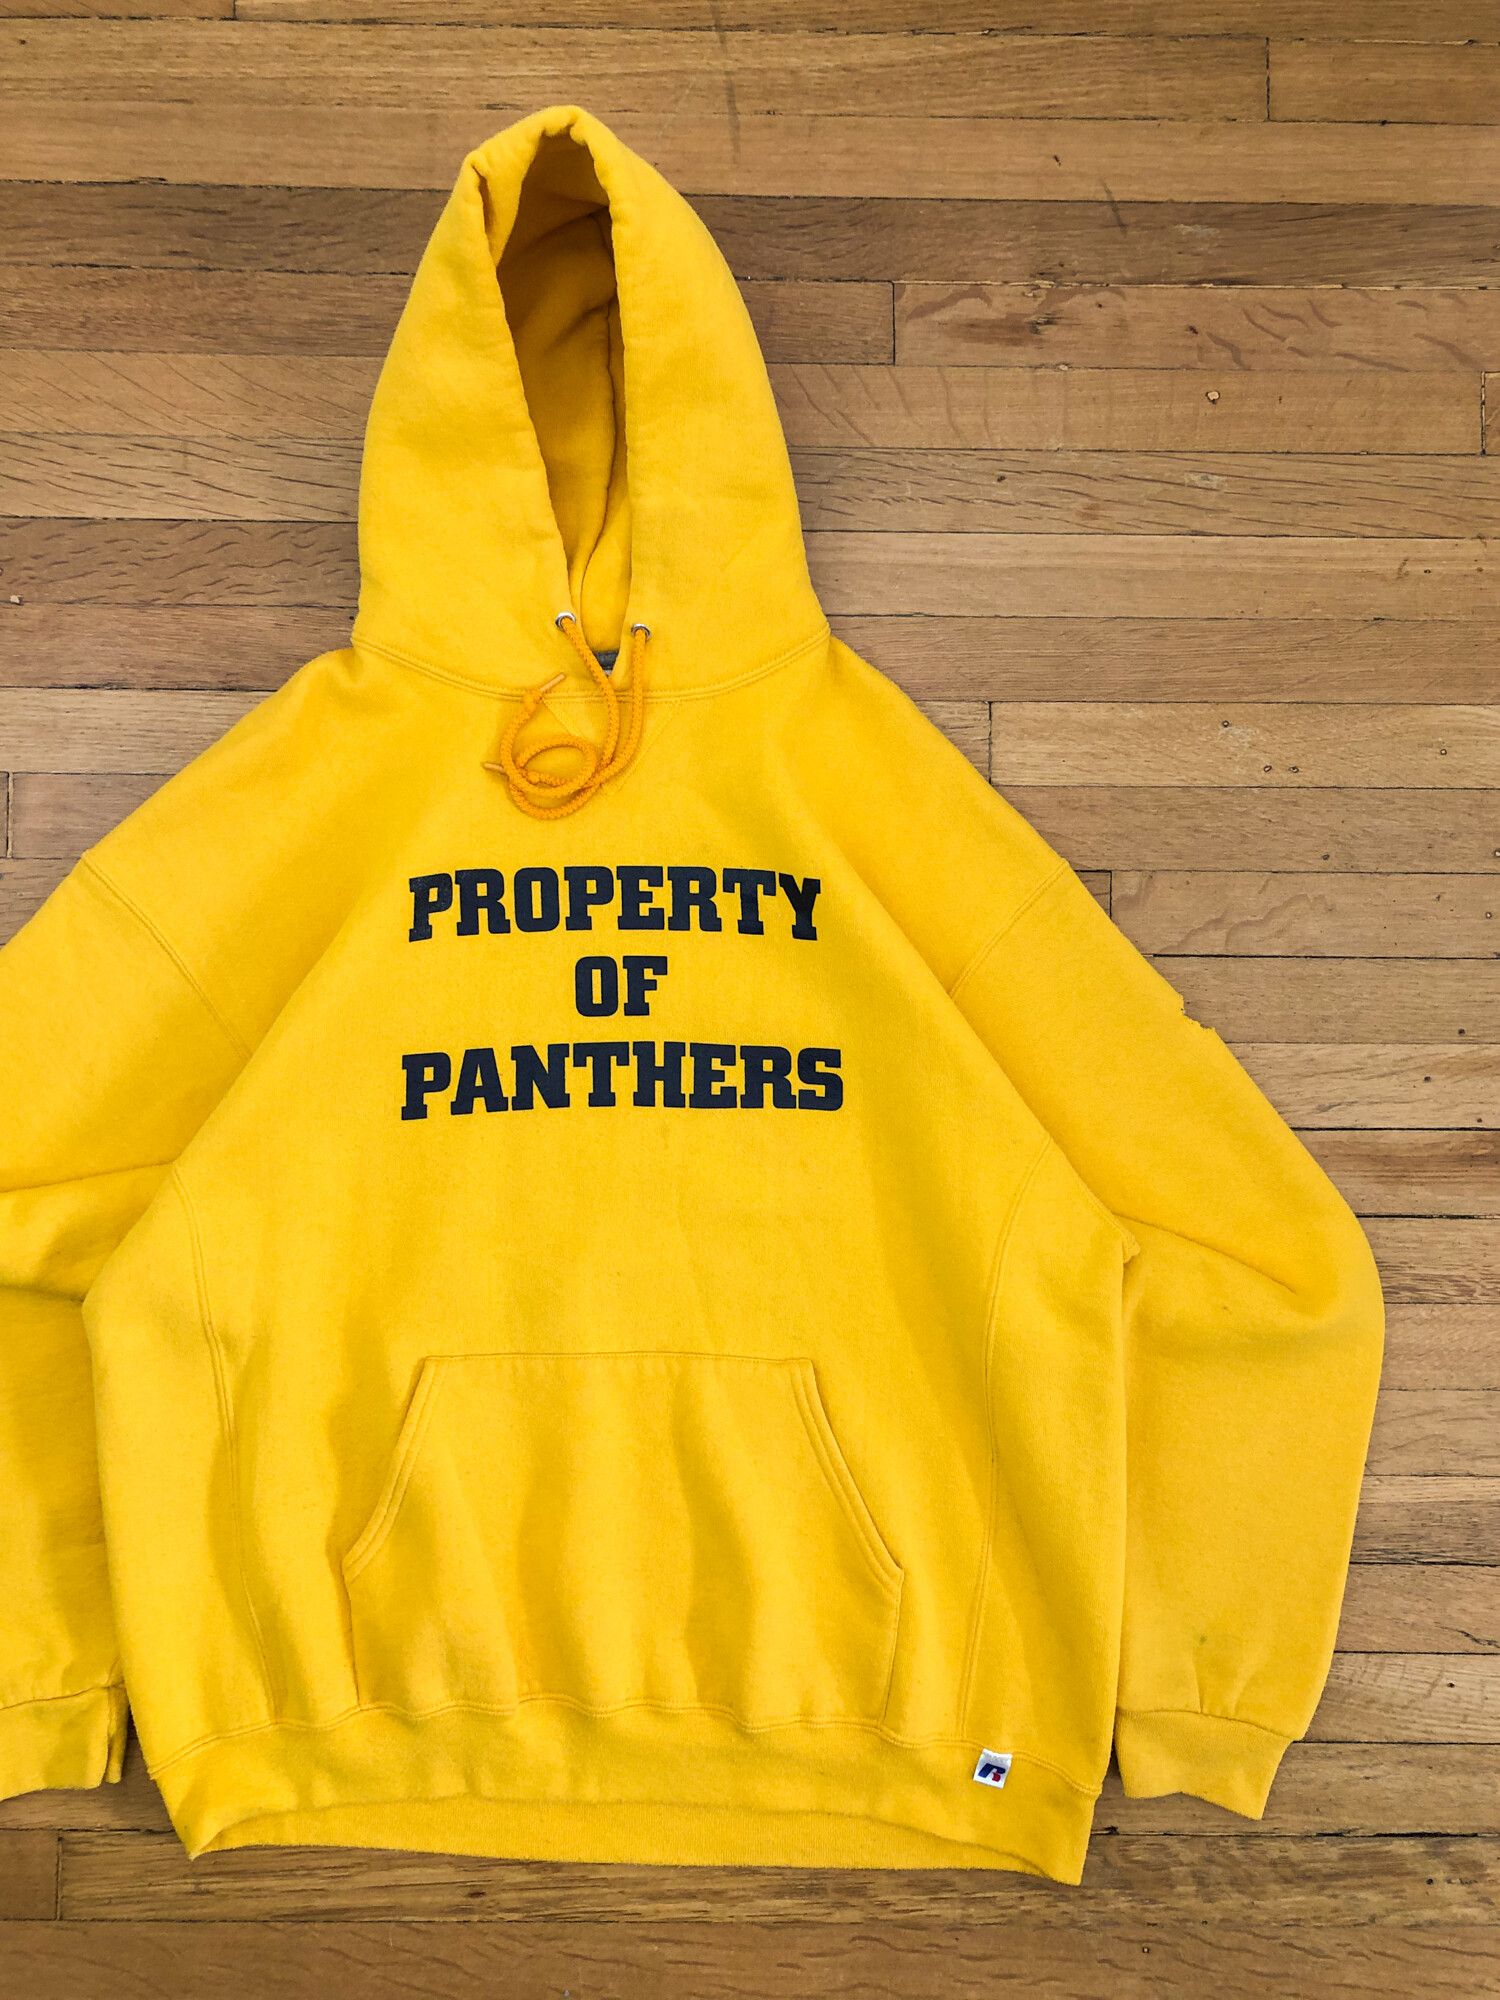 Russell Athletic 2000s Boxy 'Property of Panthers' Russell Athletic Hoodie Size US XL / EU 56 / 4 - 1 Preview